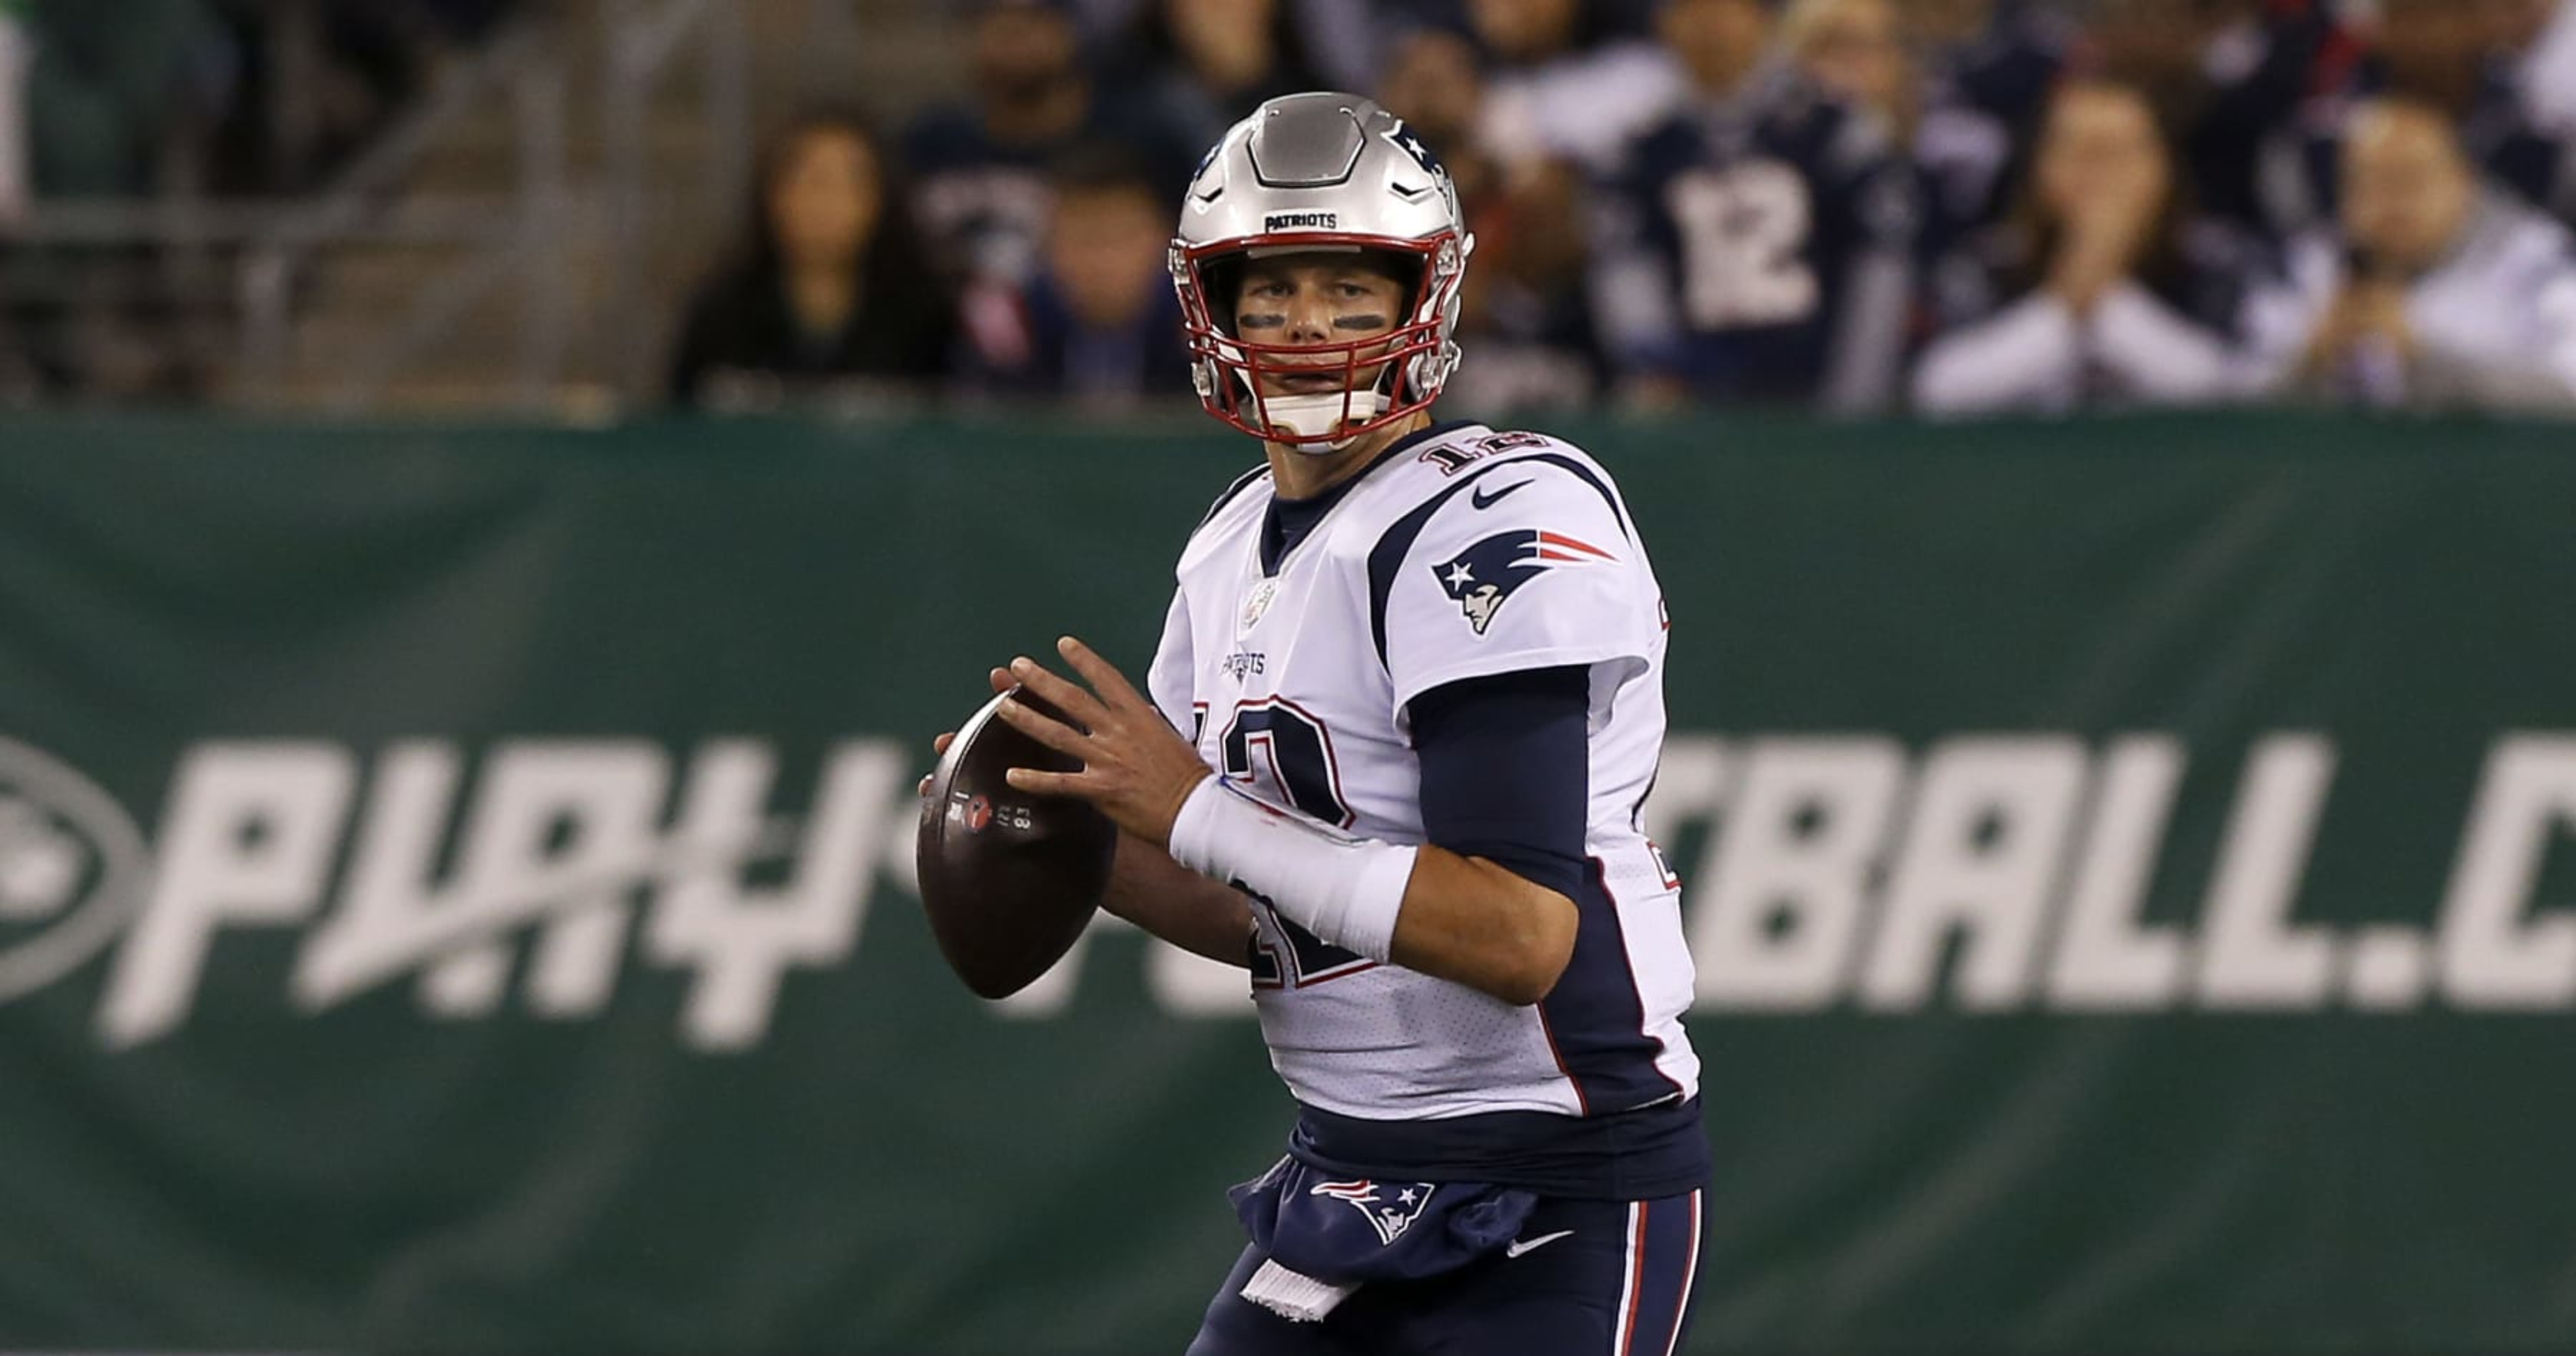 Patriots Game vs. Eagles to Honor Tom Brady Is Most Expensive Ticket of